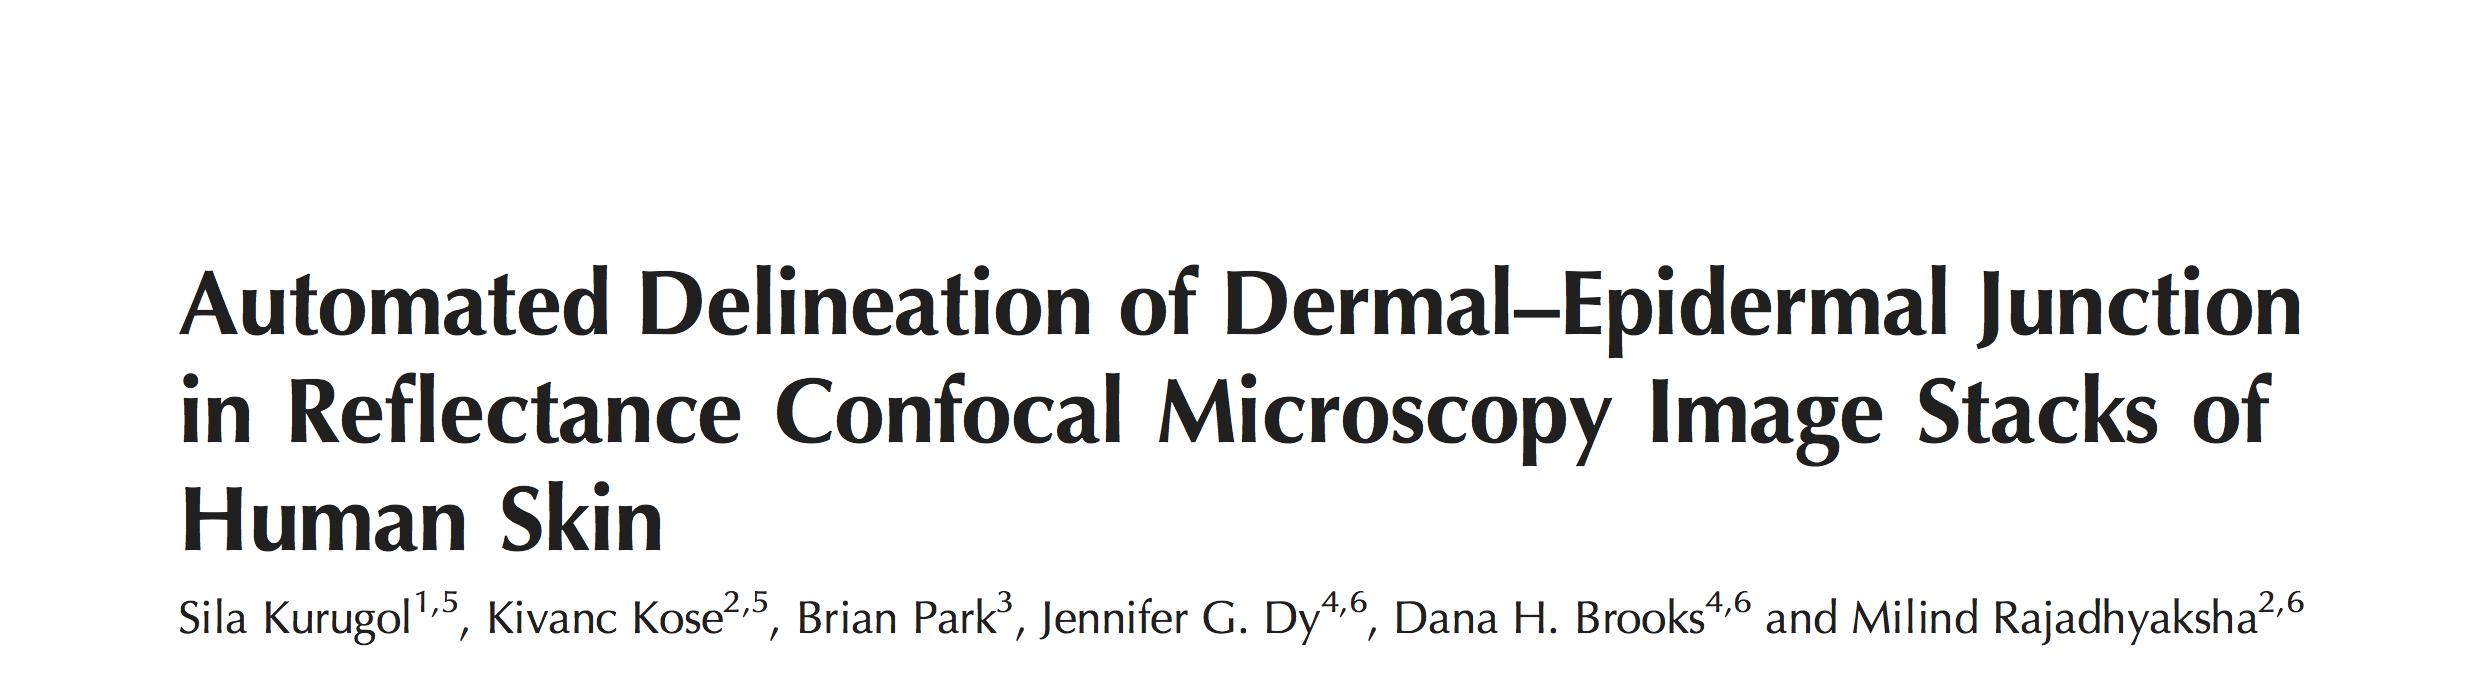 Automated Delineation of Dermal–Epidermal Junction in Reflectance Confocal Microscopy Image Stacks of Human Skin